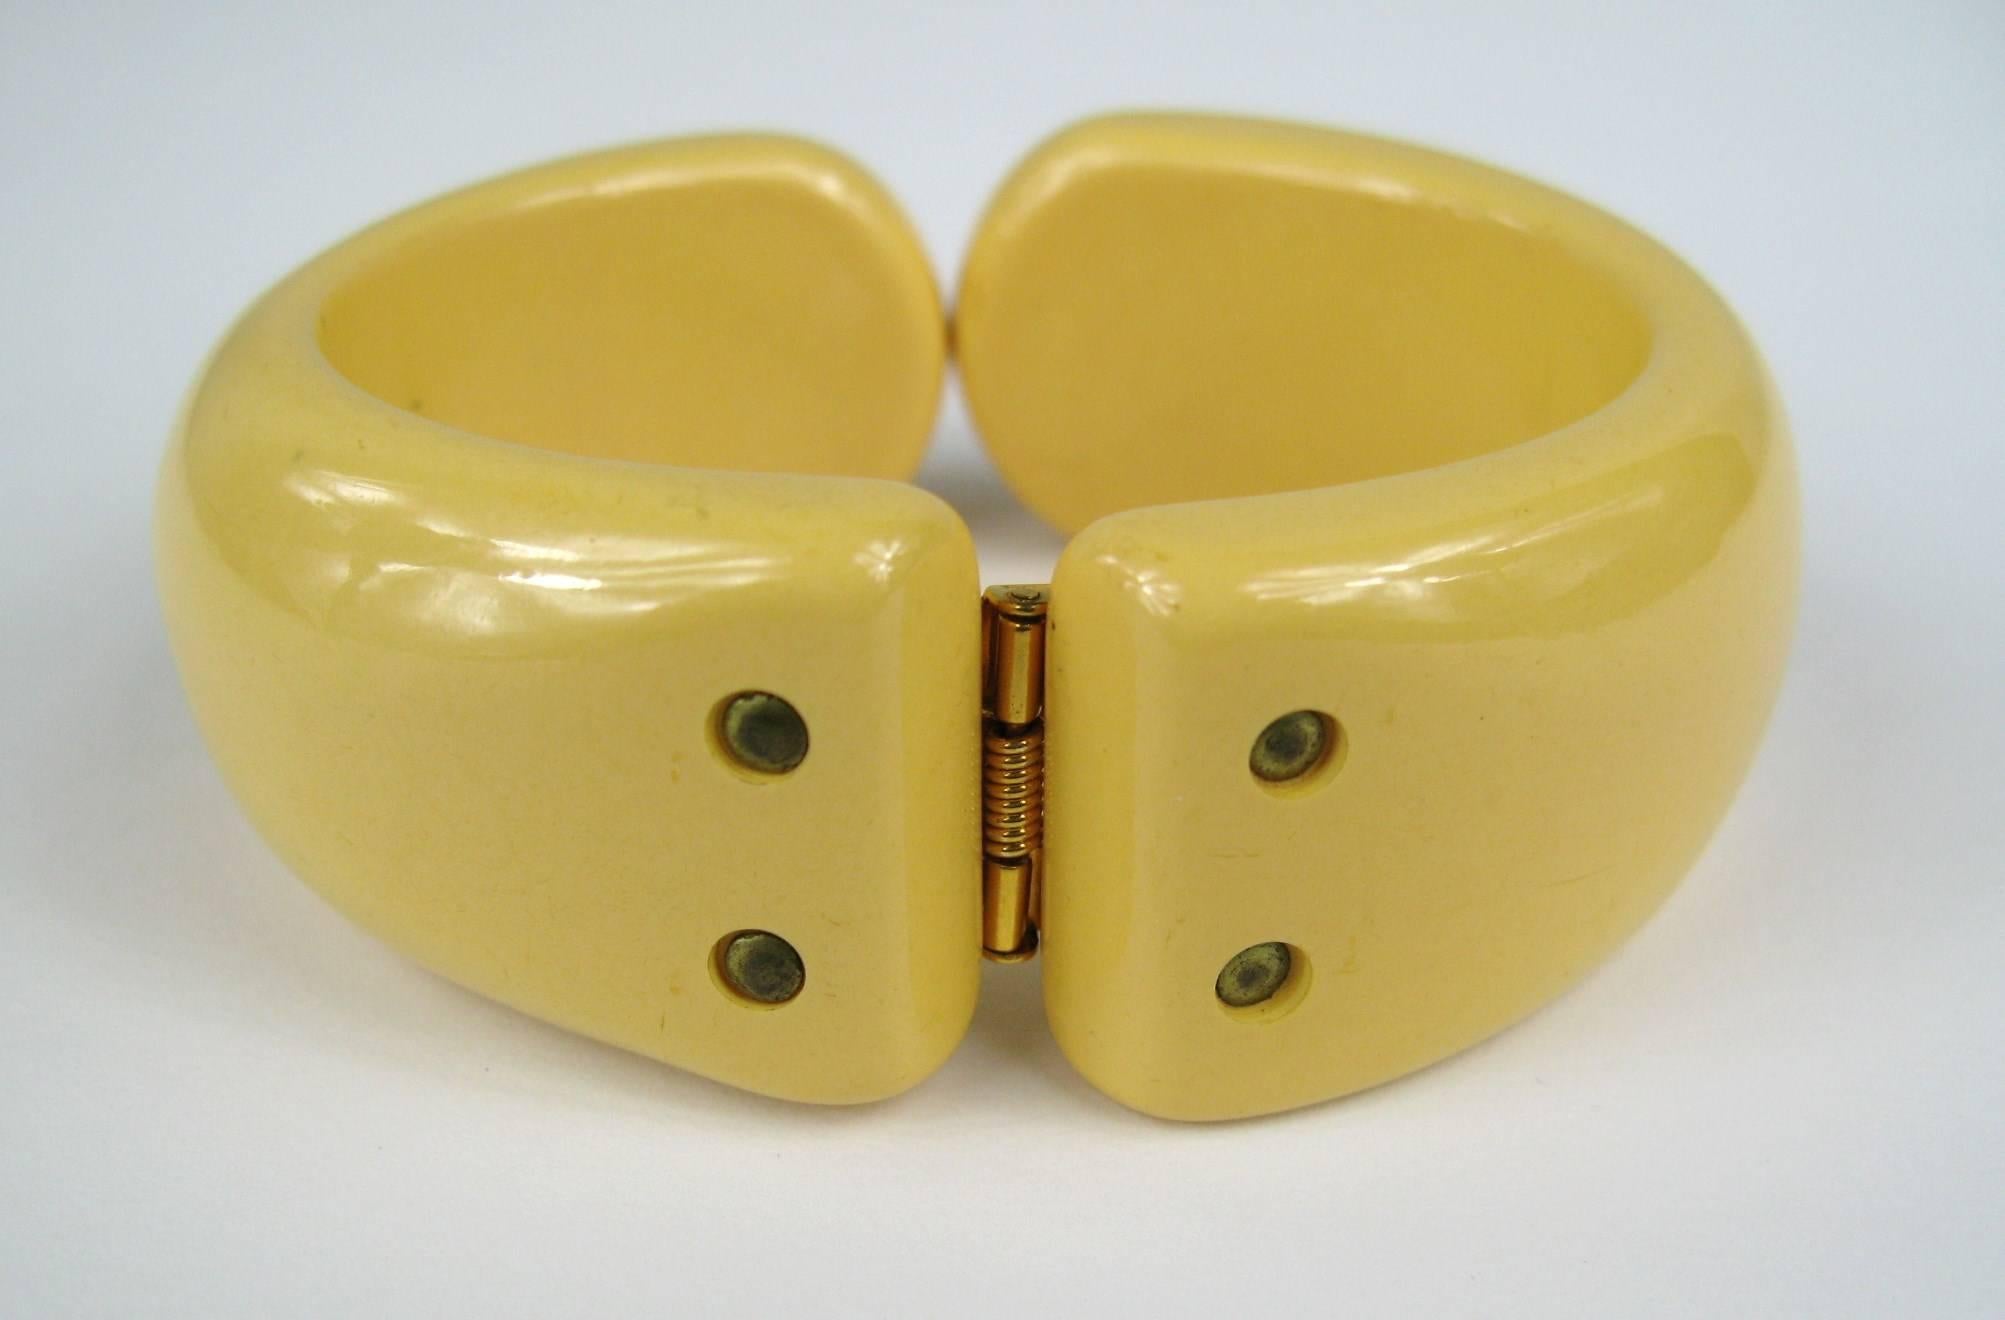 Nice wide Vintage Bakelite Clamper Bracelet. This is vintage 1930s Bakelite, not reproductions. Hinged at the back. Measuring 1 inch wide . Will fit a 7 inch wrist. Many more fabulous pieces of bakelite on our storefront. This is out of a massive